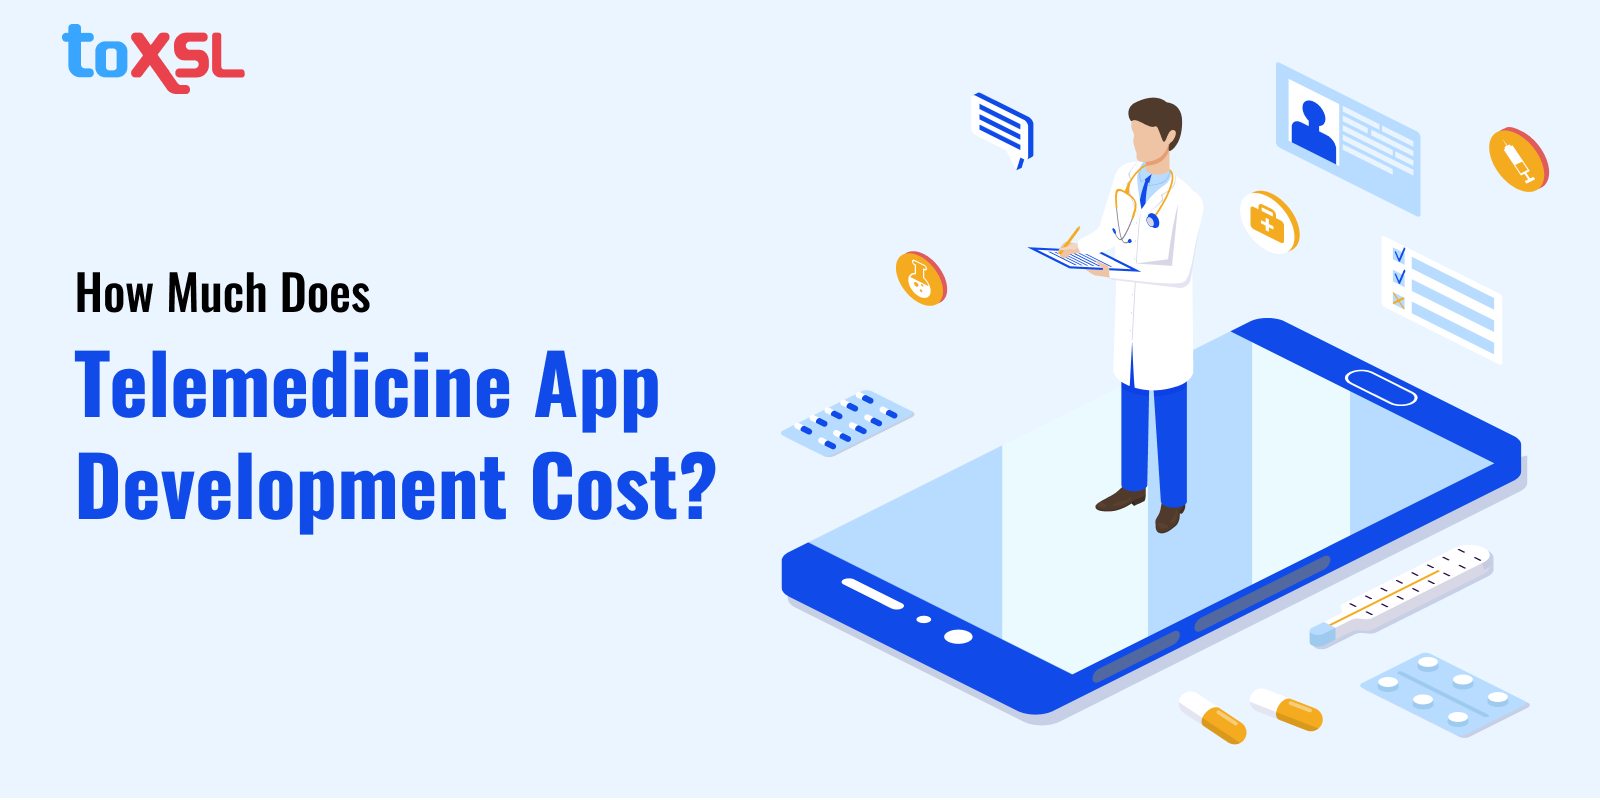 How Much Does Telemedicine App Development Cost?